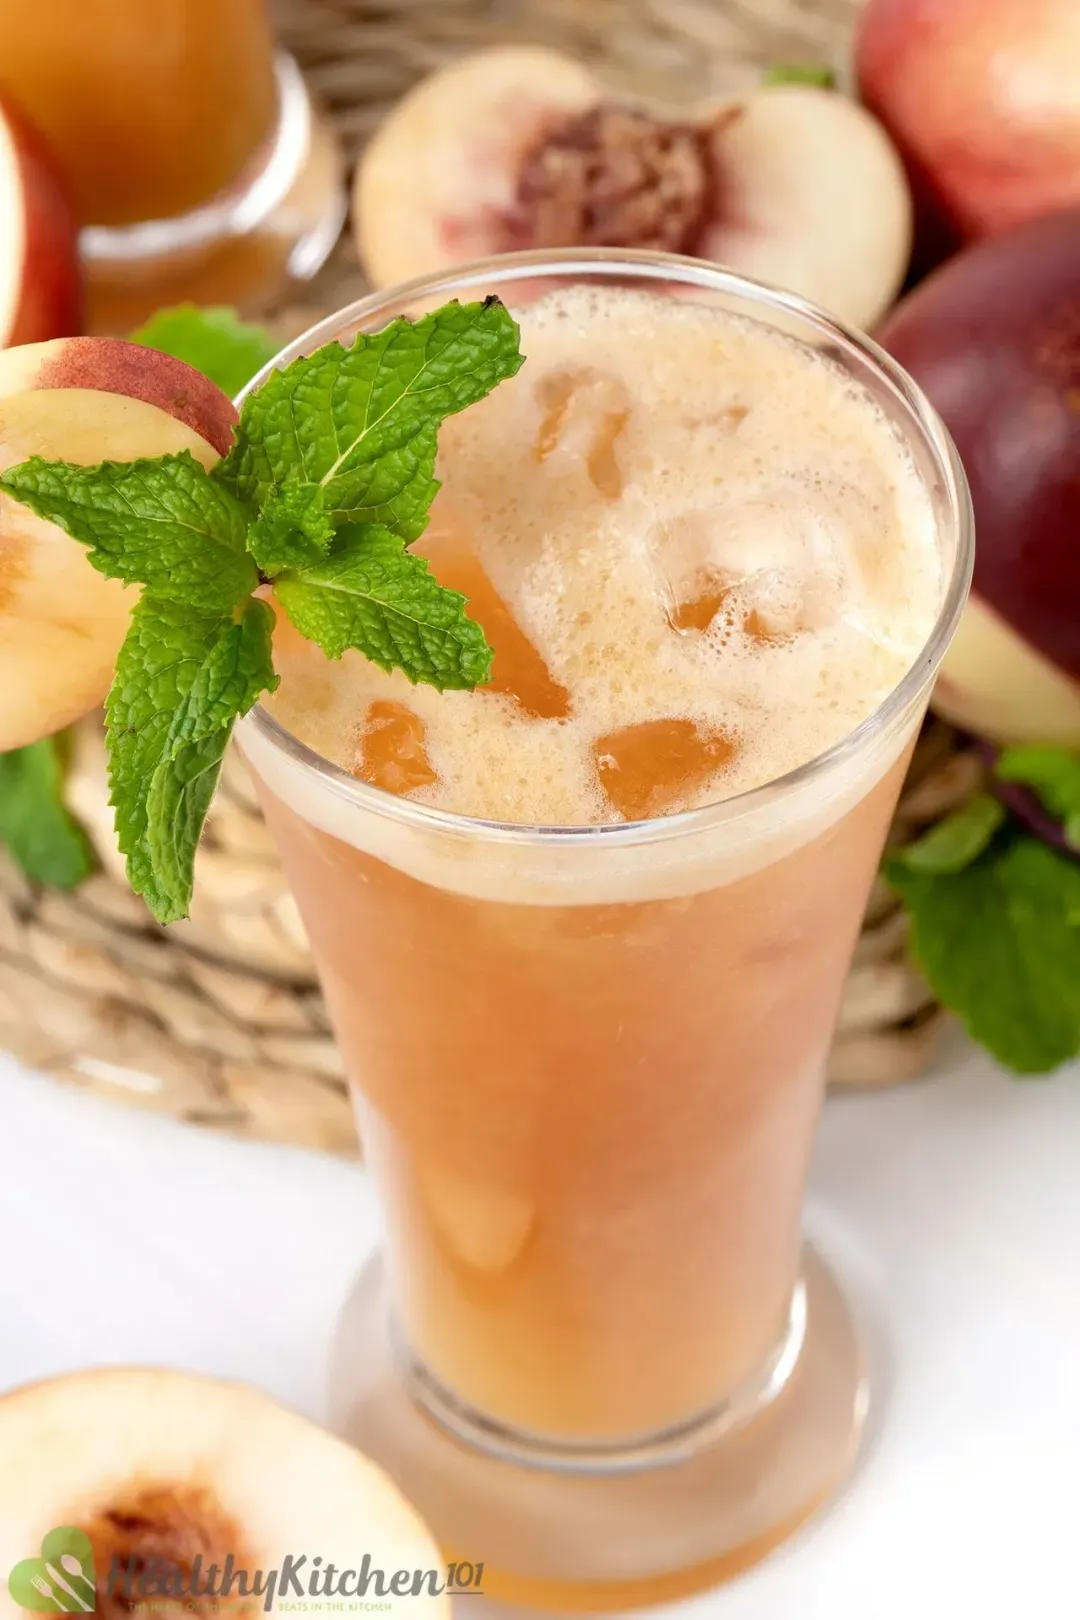 A short glass of peach juice with ice, next to peach halves and lots of mint leaves